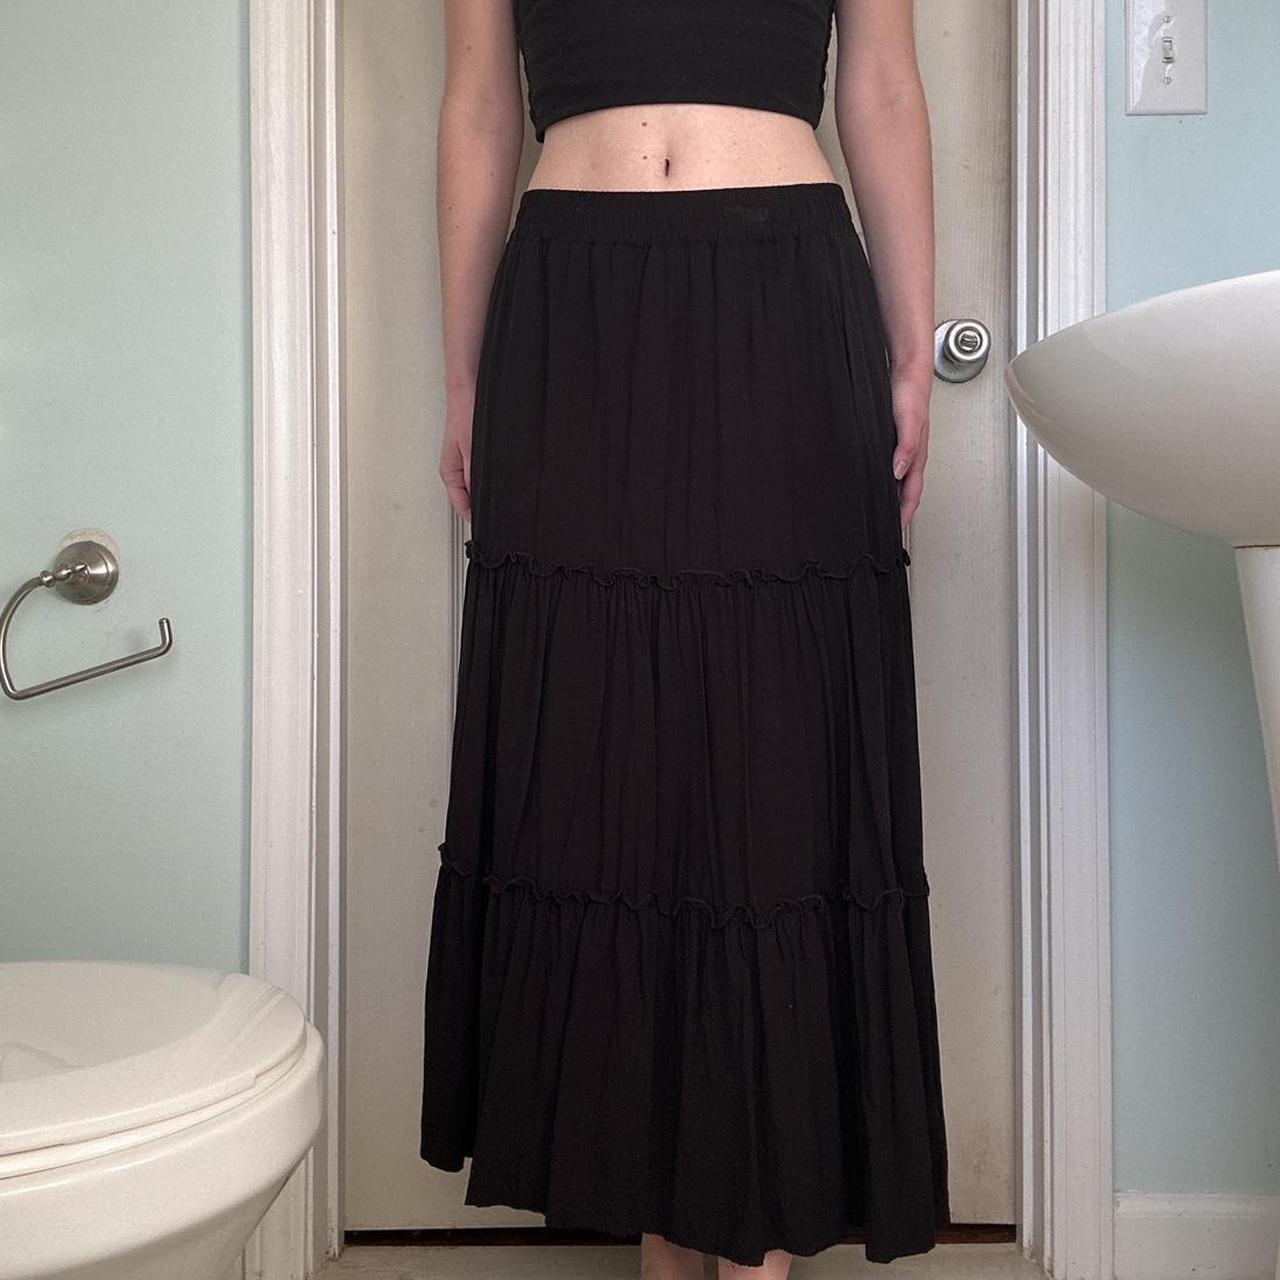 Black Tiered Pleated Maxi Skirt FREE Shipping; no... - Depop